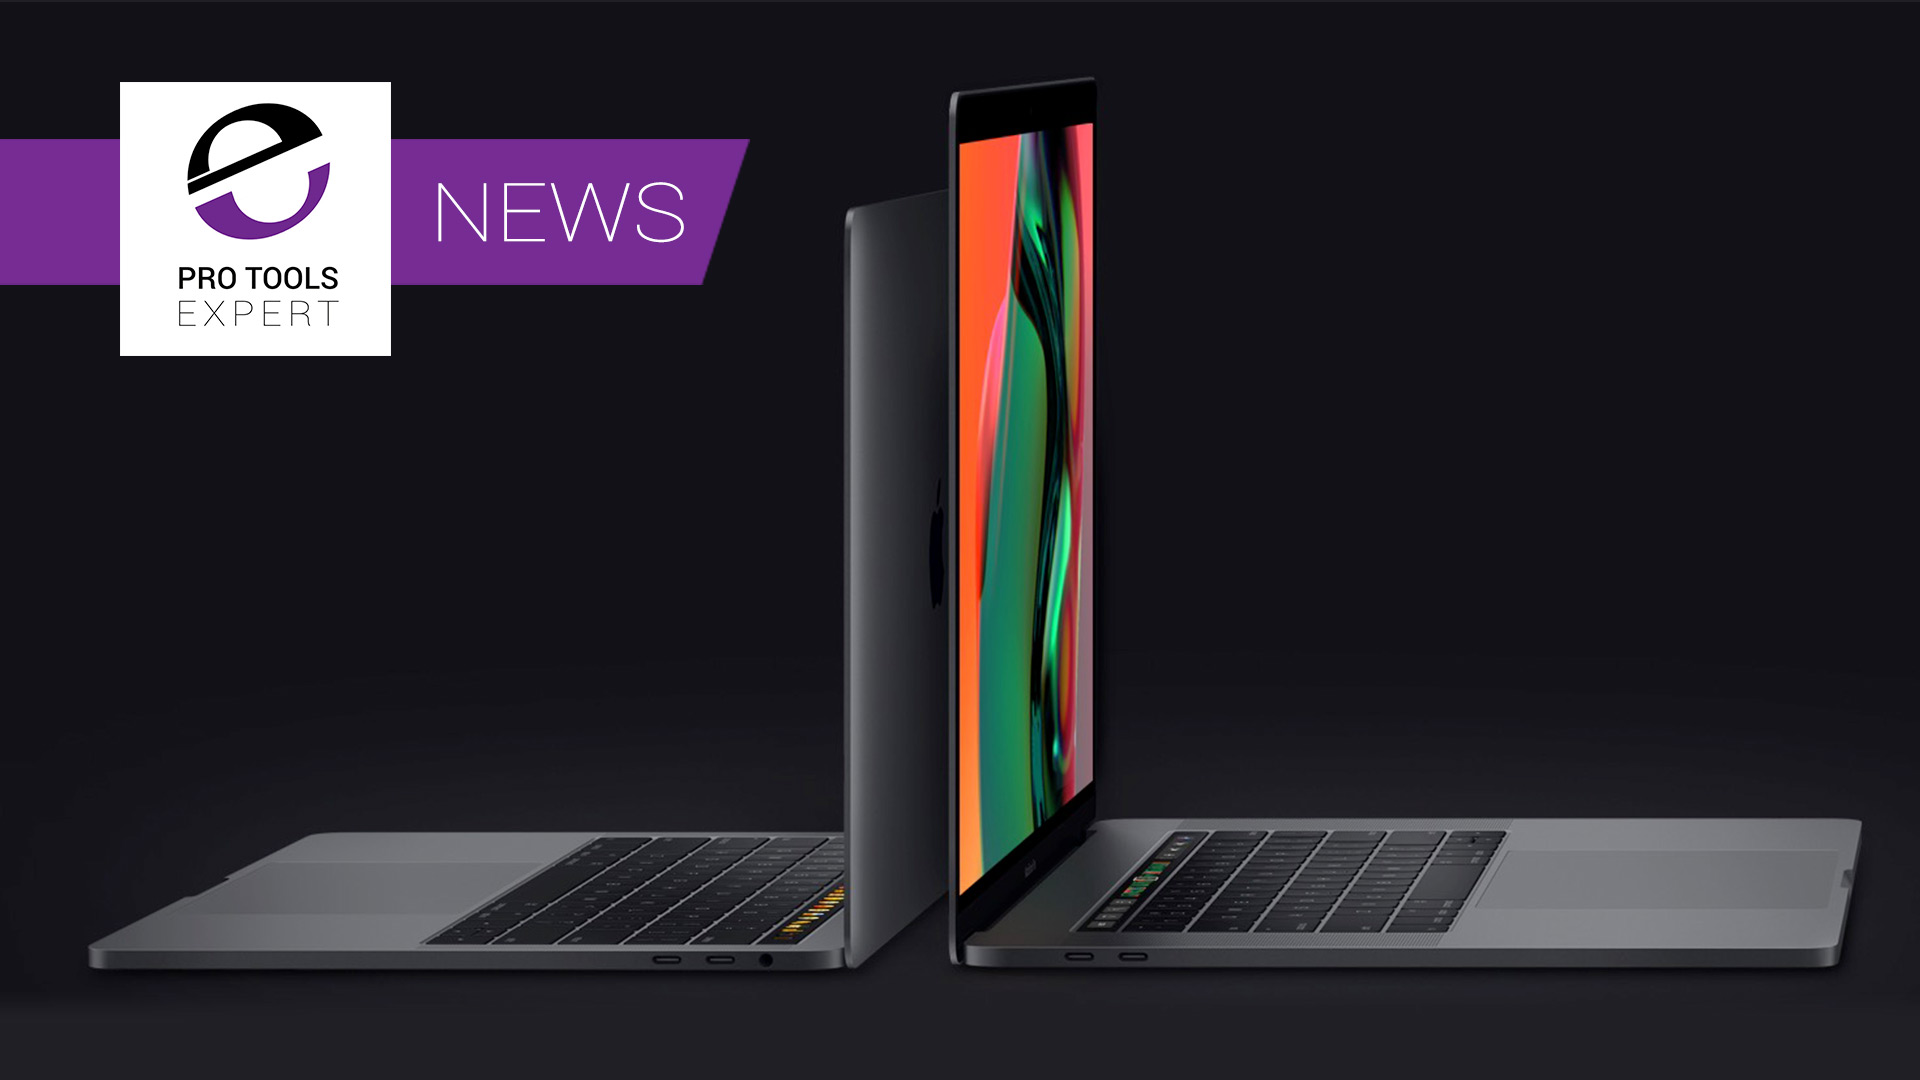 Apple Release New MacBook Pro With Up to 32GB Ram - Could This Be Your Next  Pro Tools Computer? | Pro Tools - The leading website for Pro Tools users